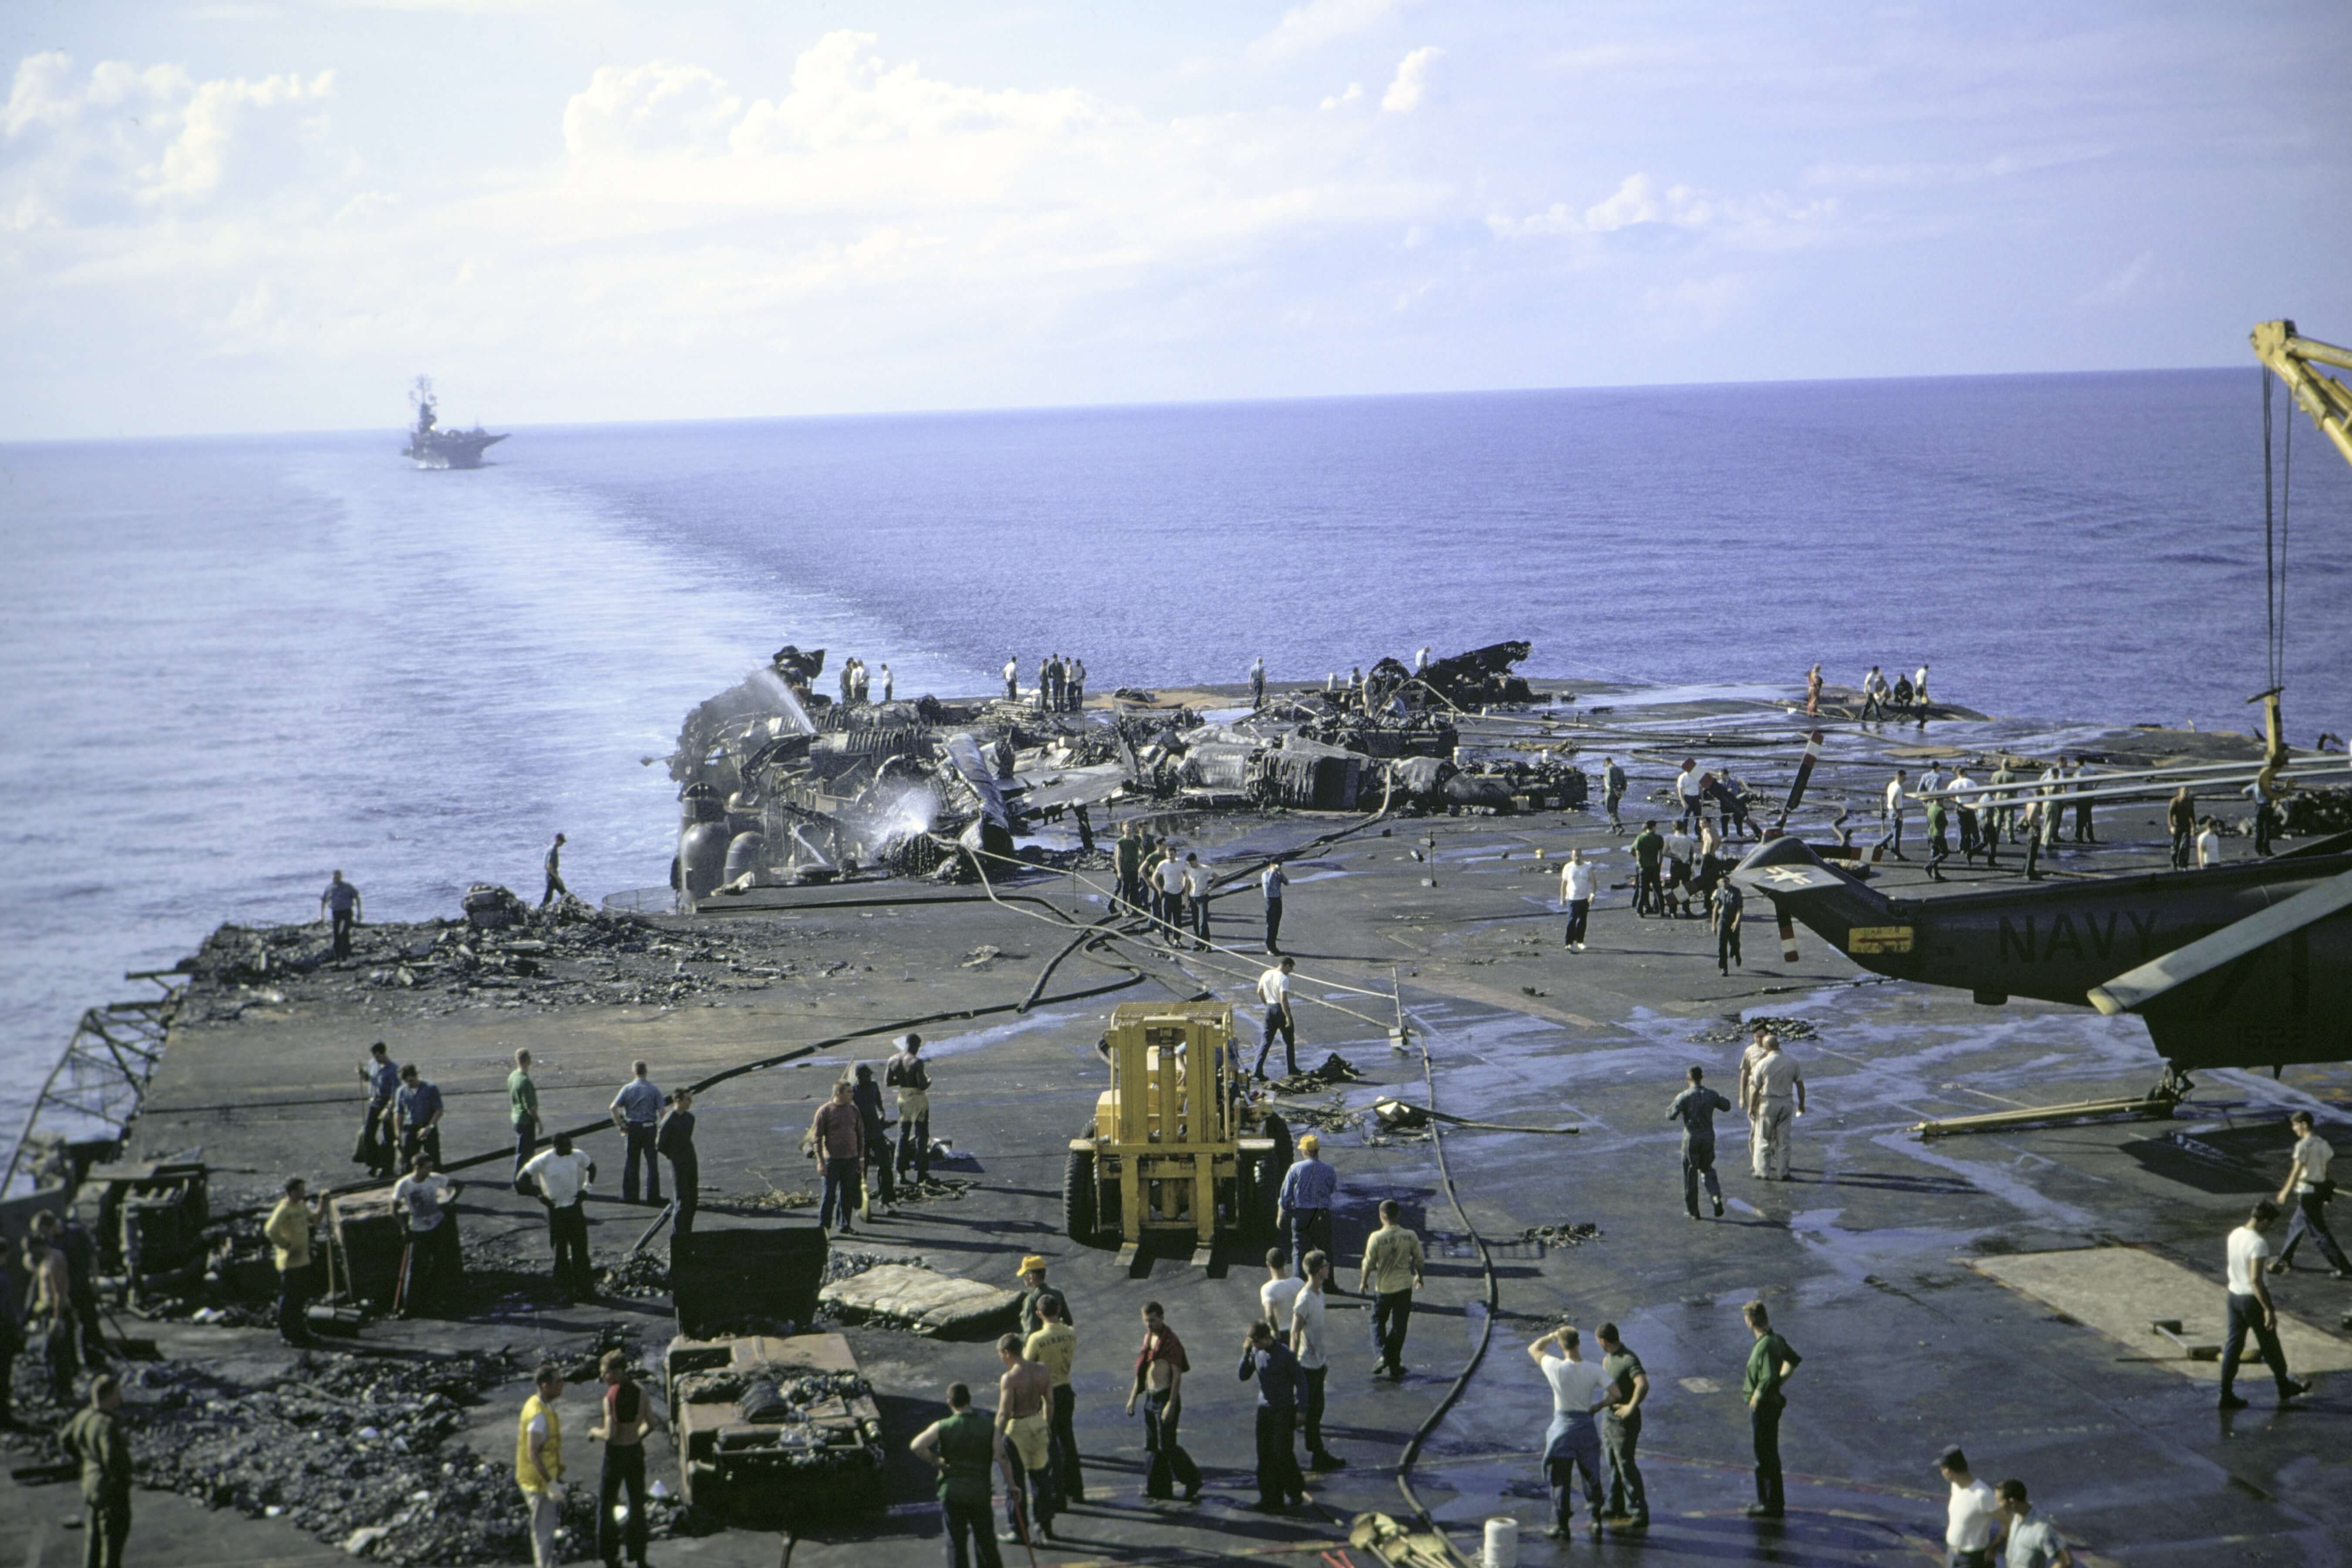 Wide shot of the deck of a large Navy boat, men standing and spraying down with fire hoses.